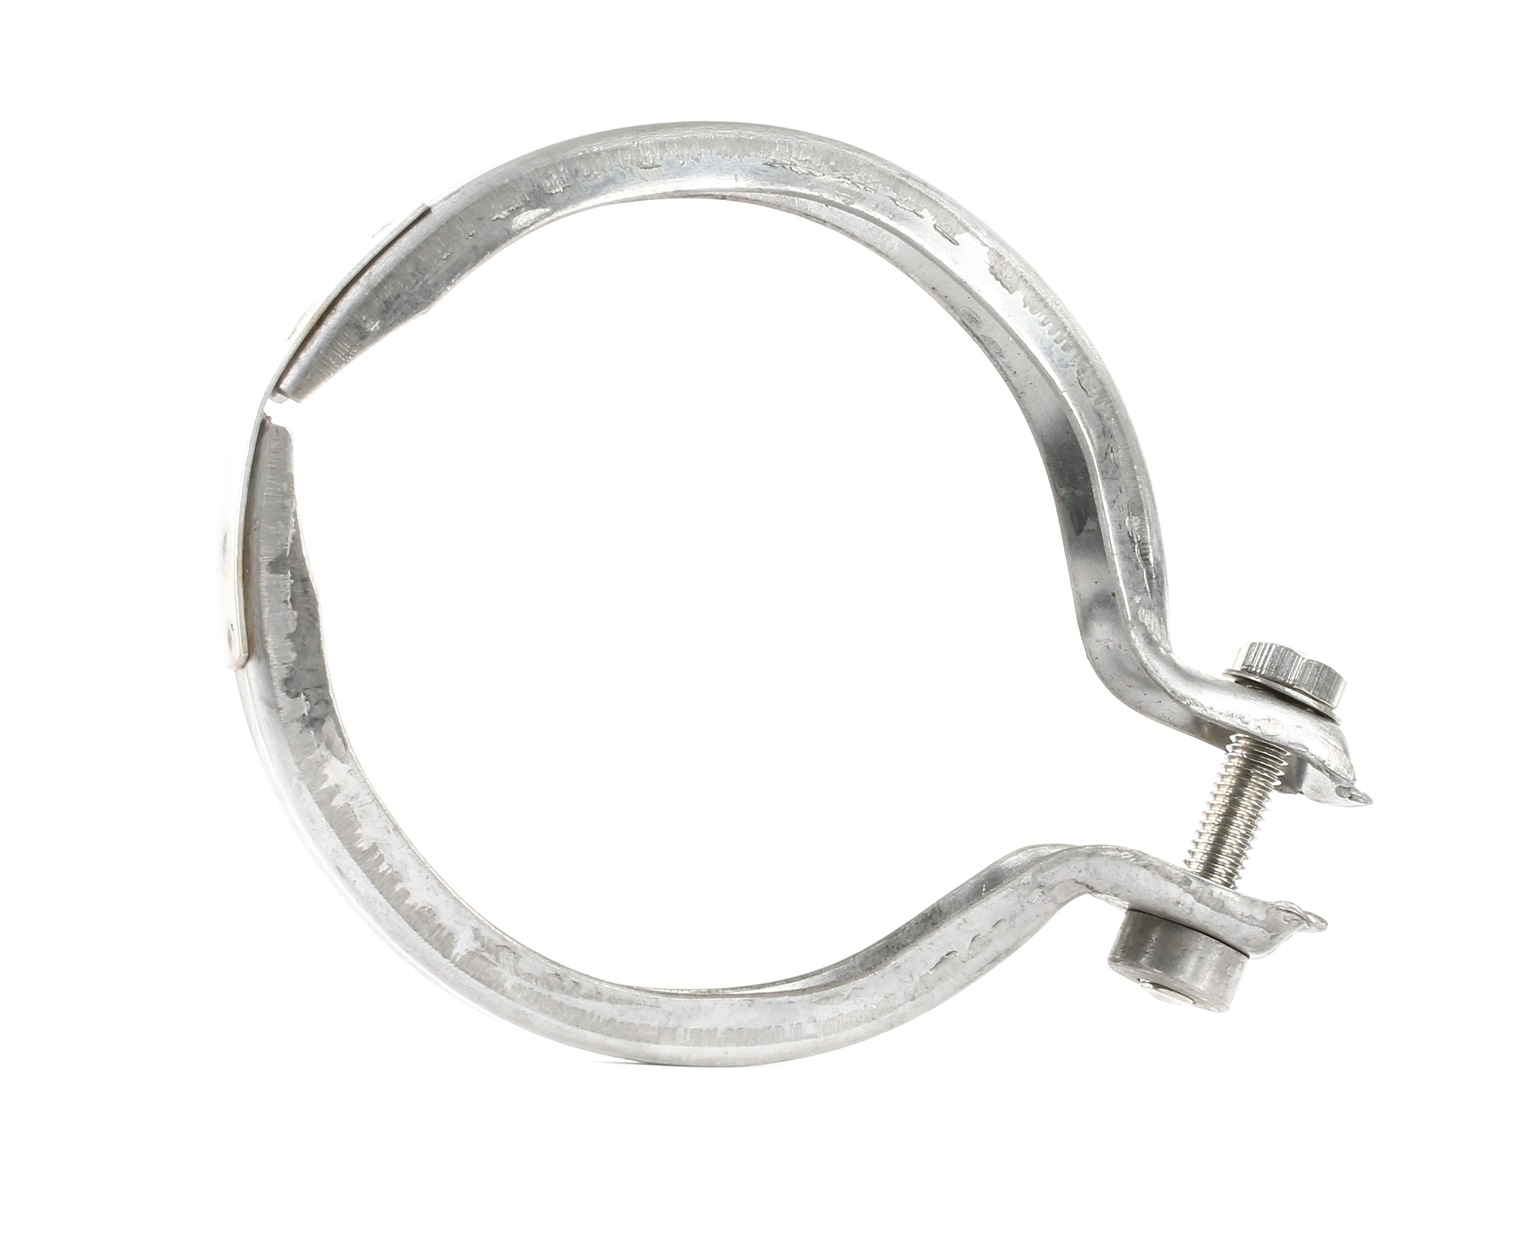 BMW G31 Exhaust parts - Exhaust clamp FA1 104-891